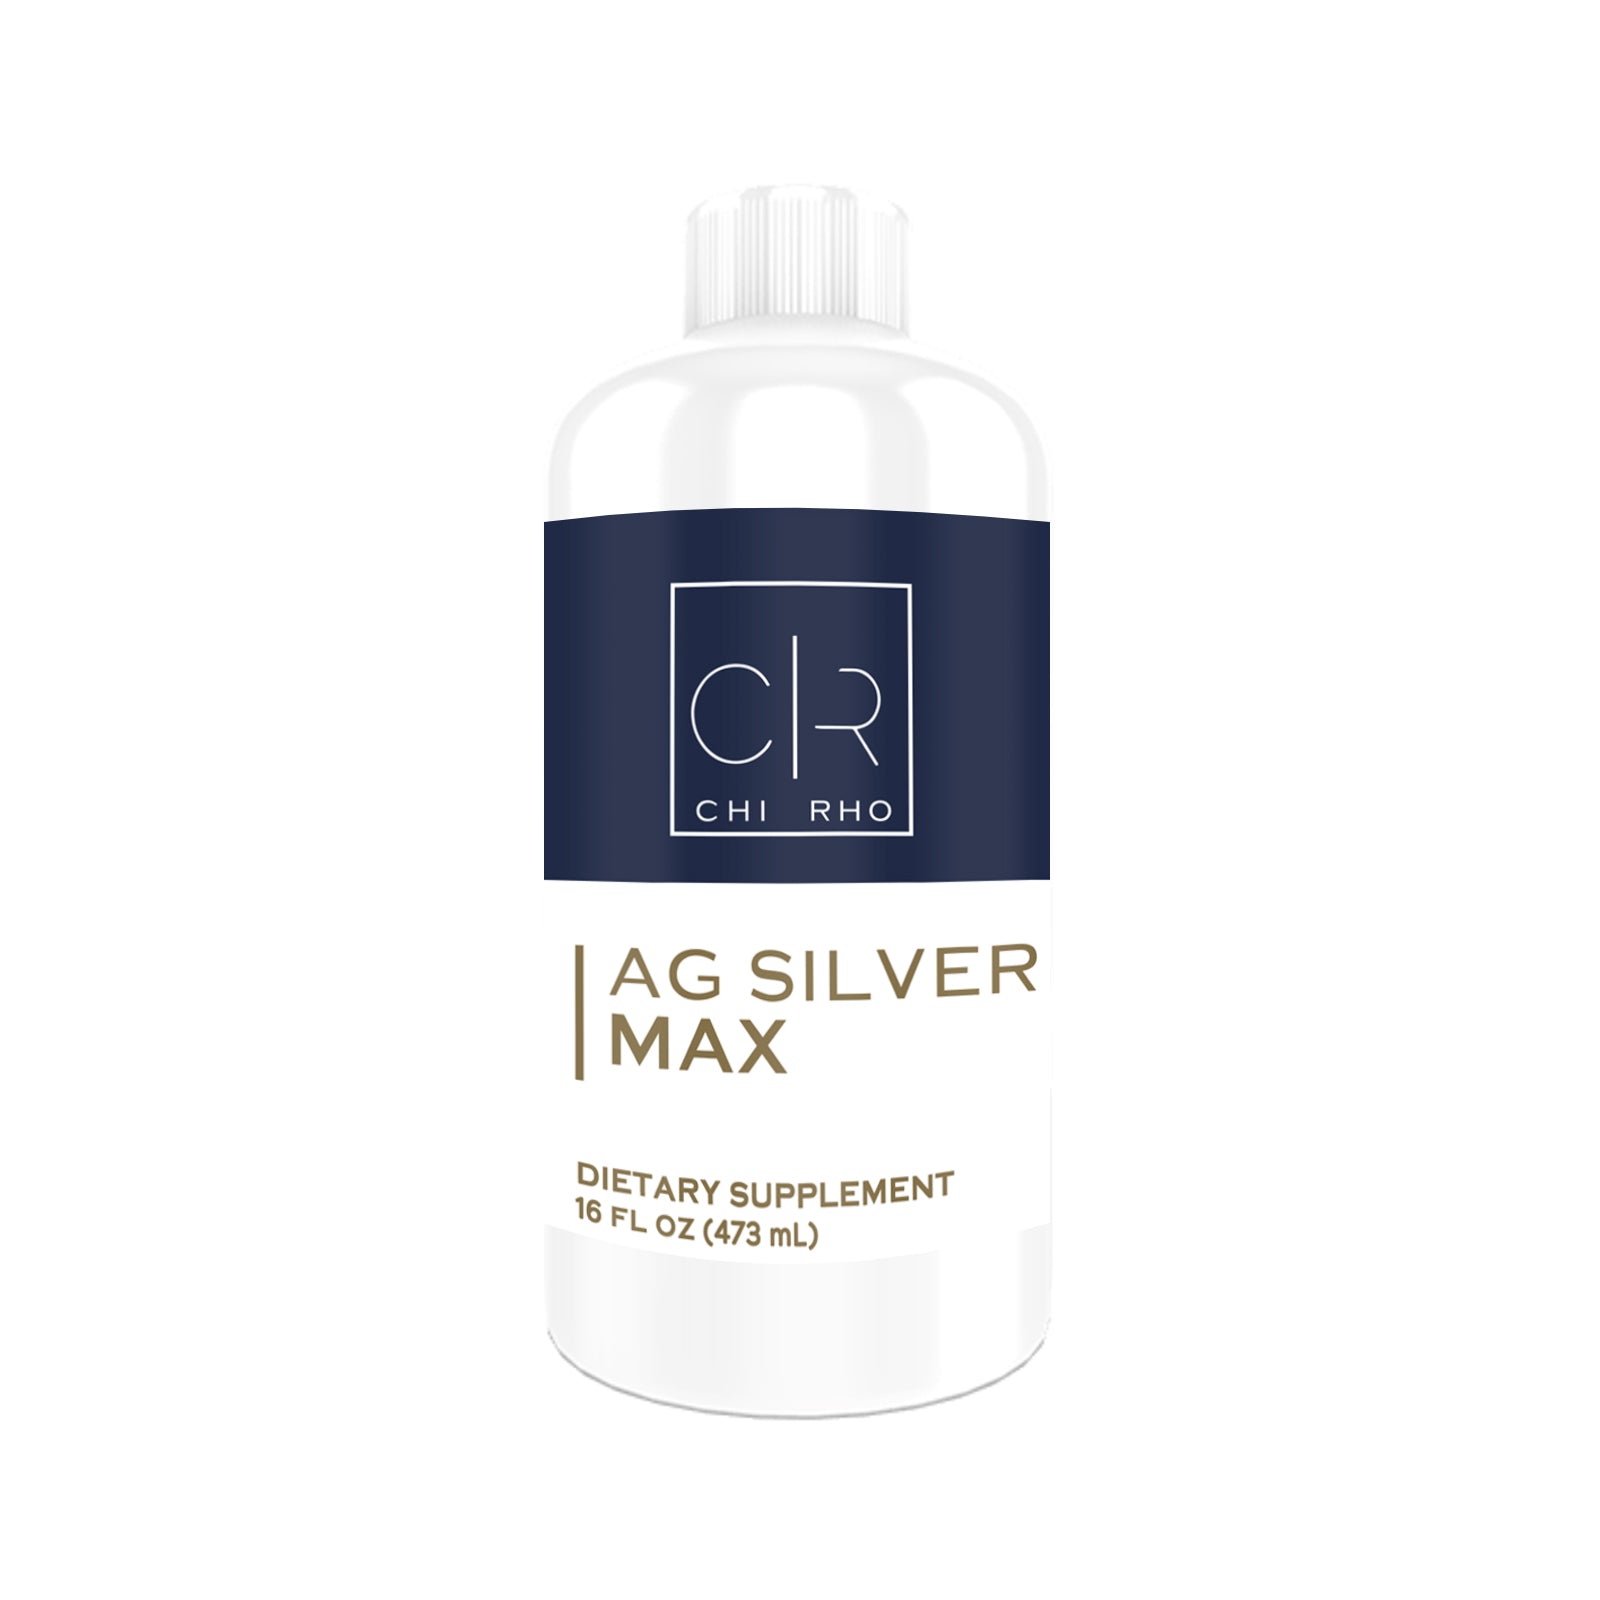 Chi Rho Chiropractic - AG Silver Max